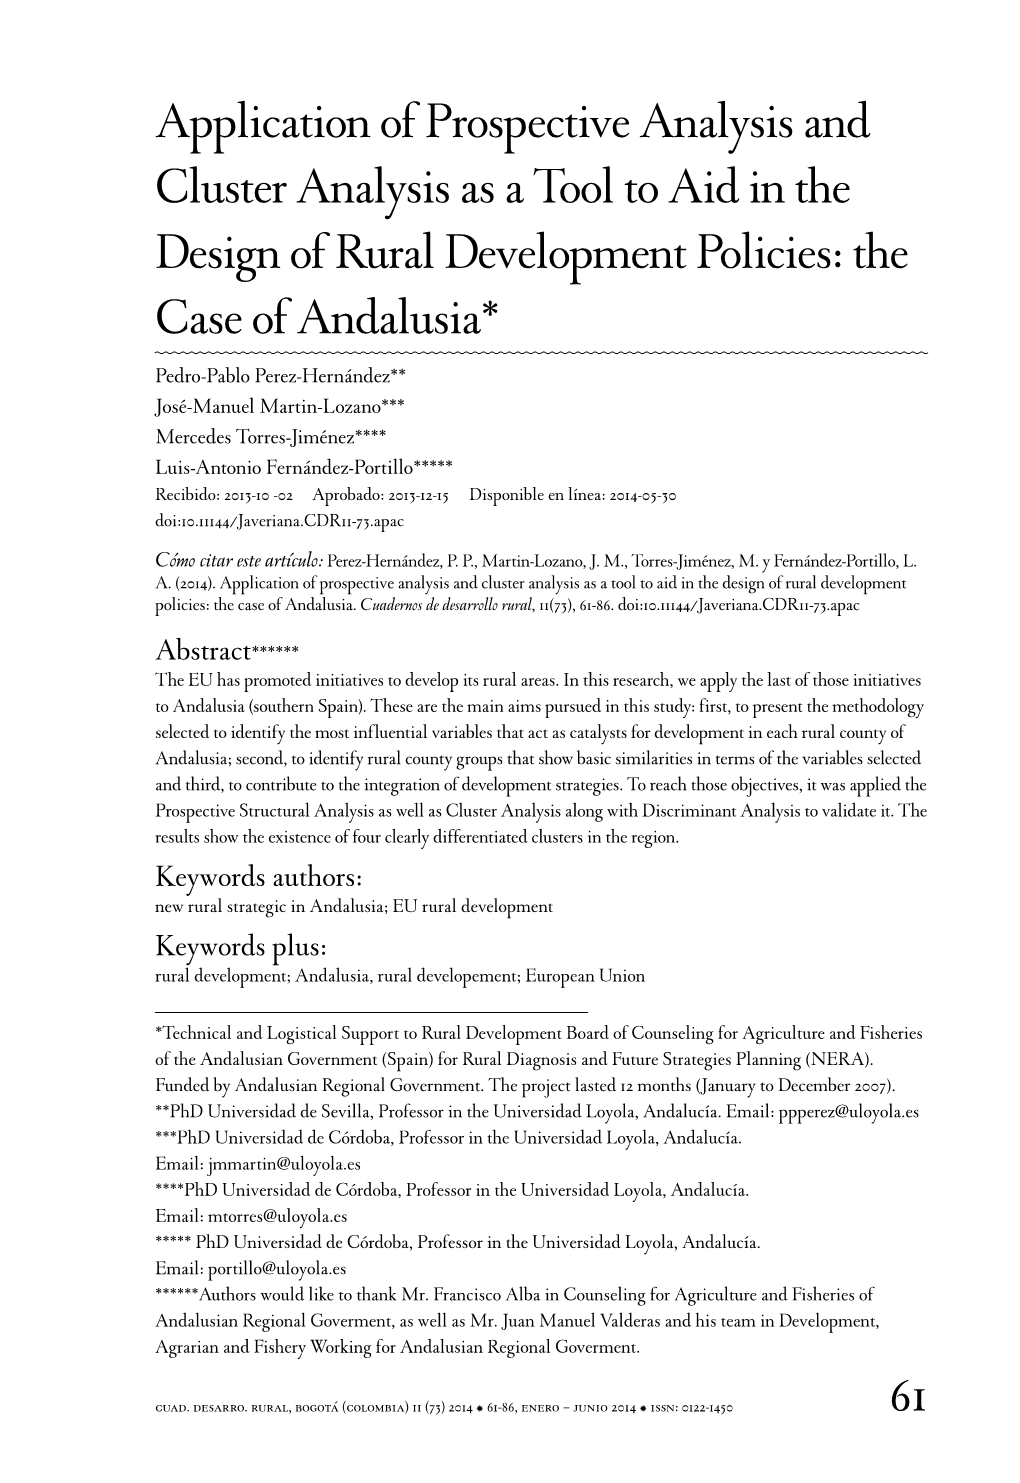 Application of Prospective Analysis and Cluster Analysis As a Tool to Aid in the Design of Rural Development Policies: The